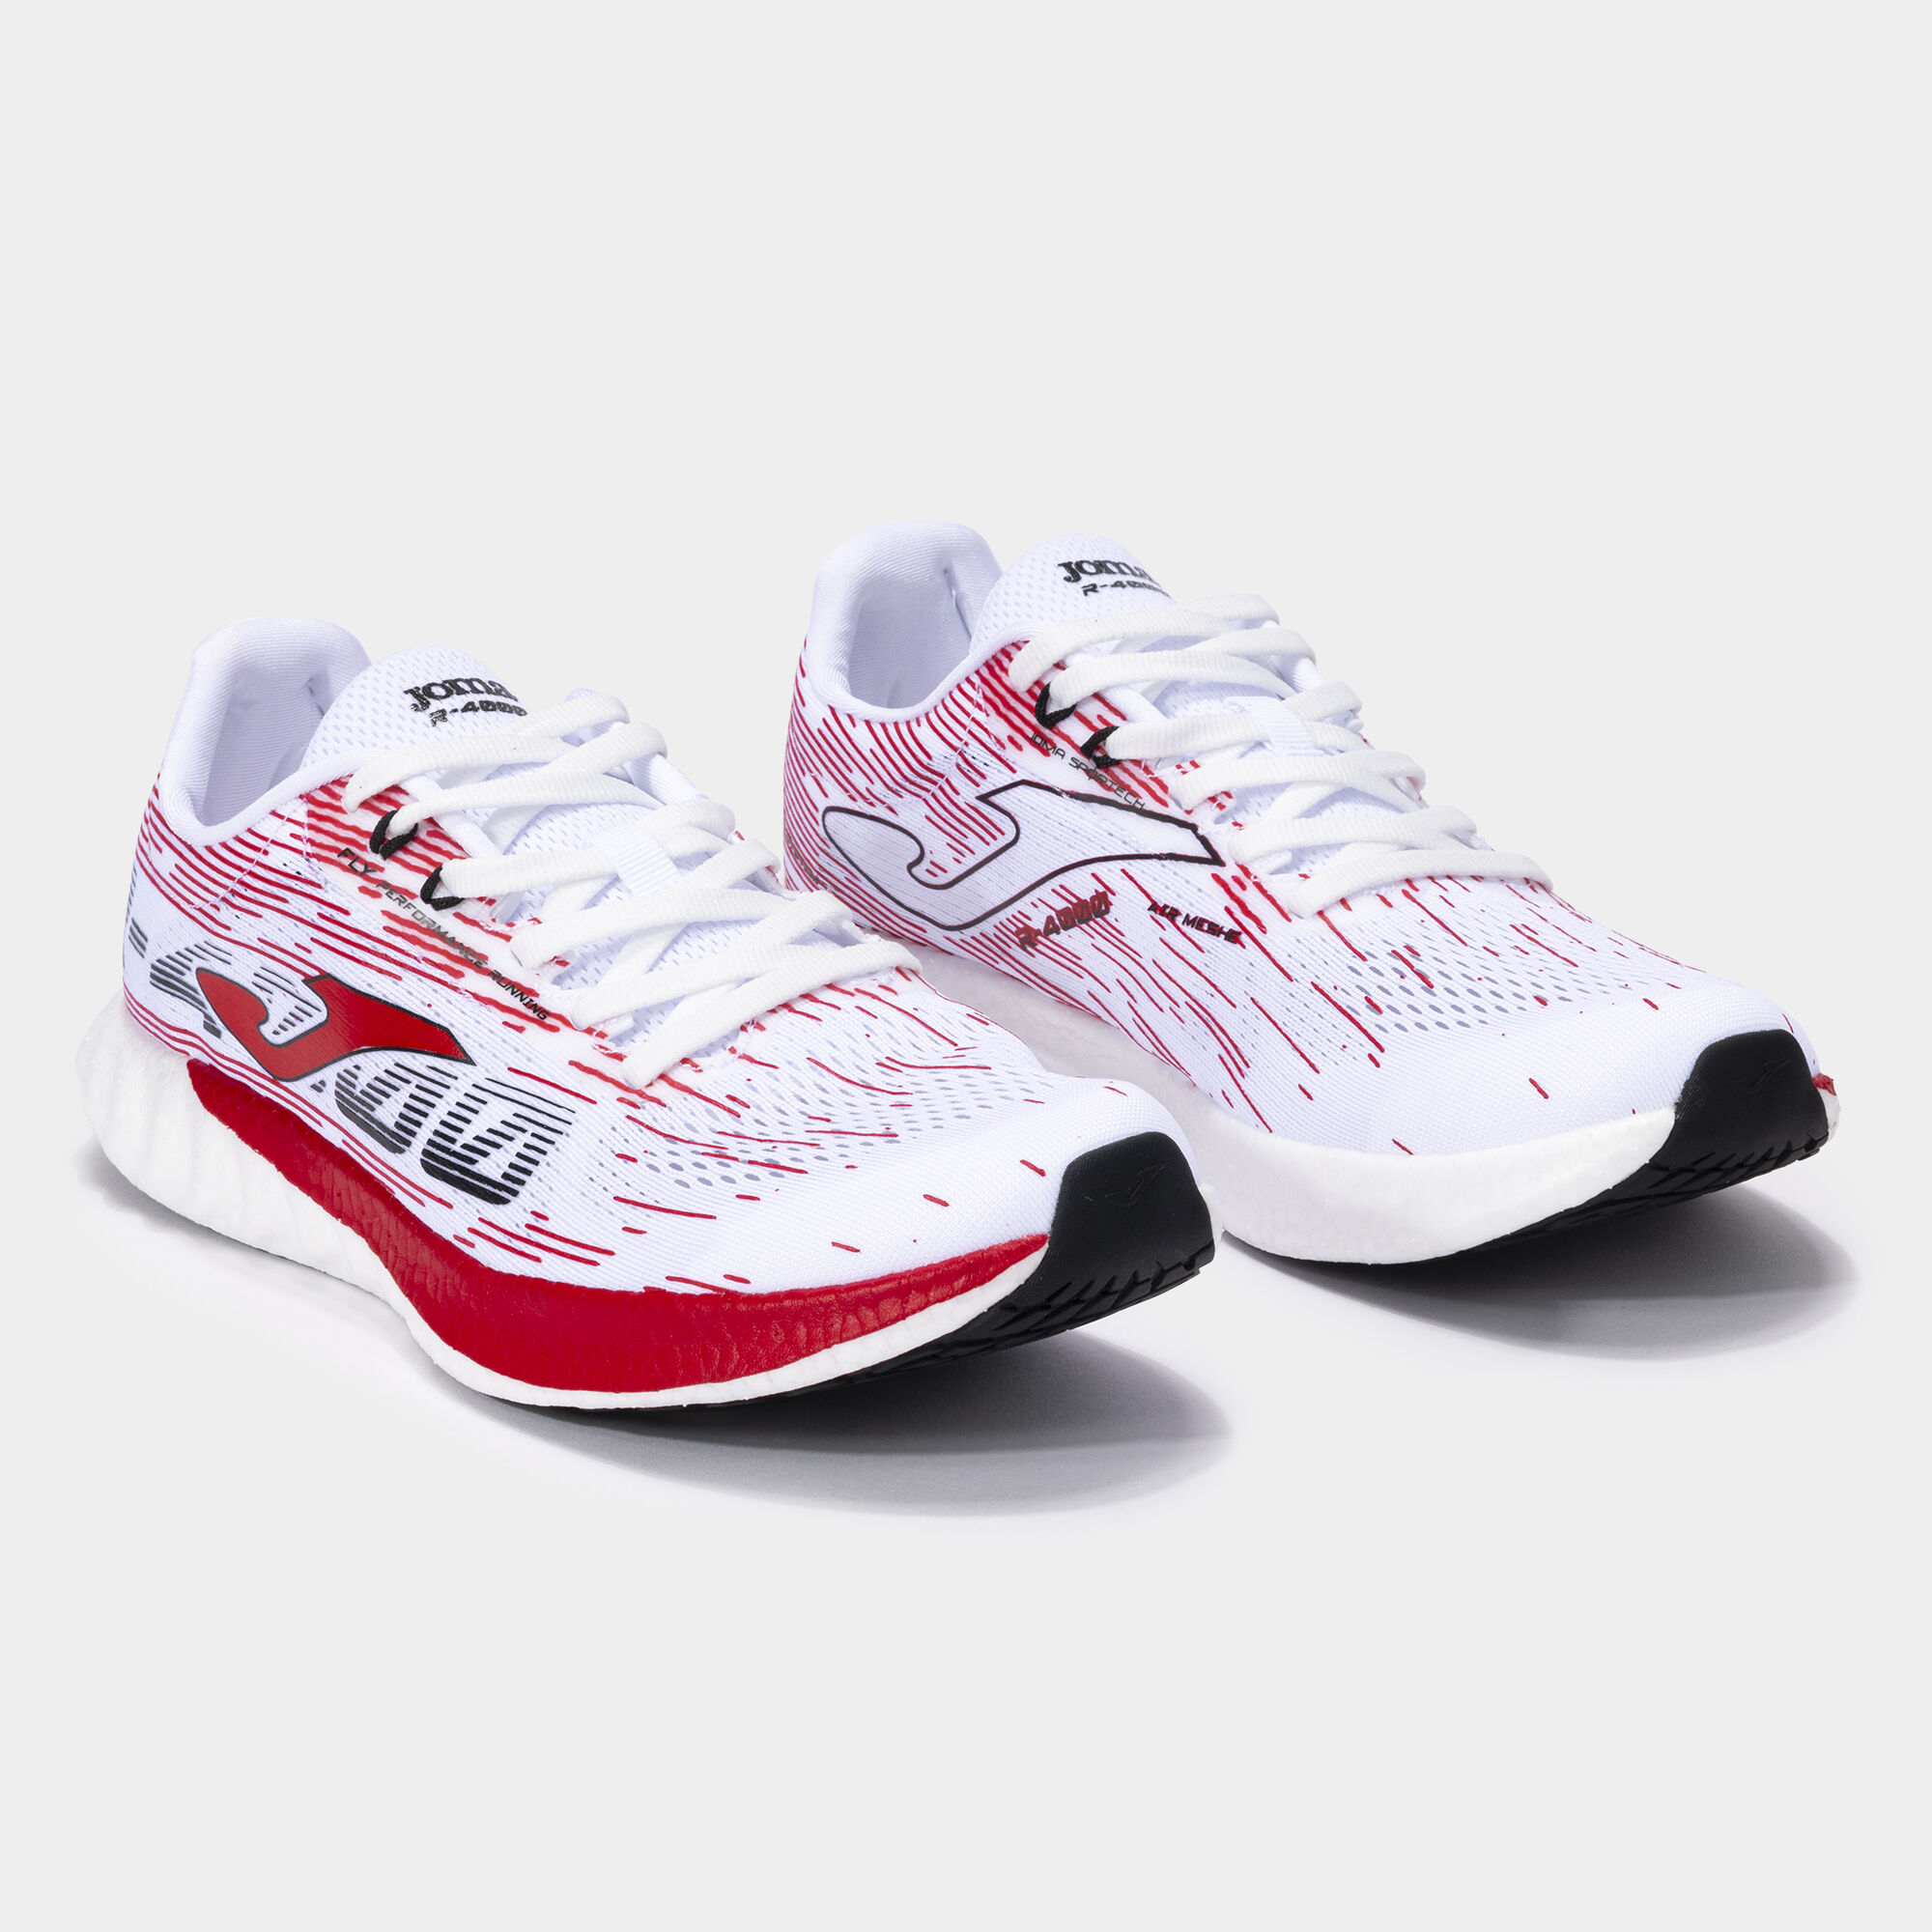 Running shoes R.4000 24 unisex white red